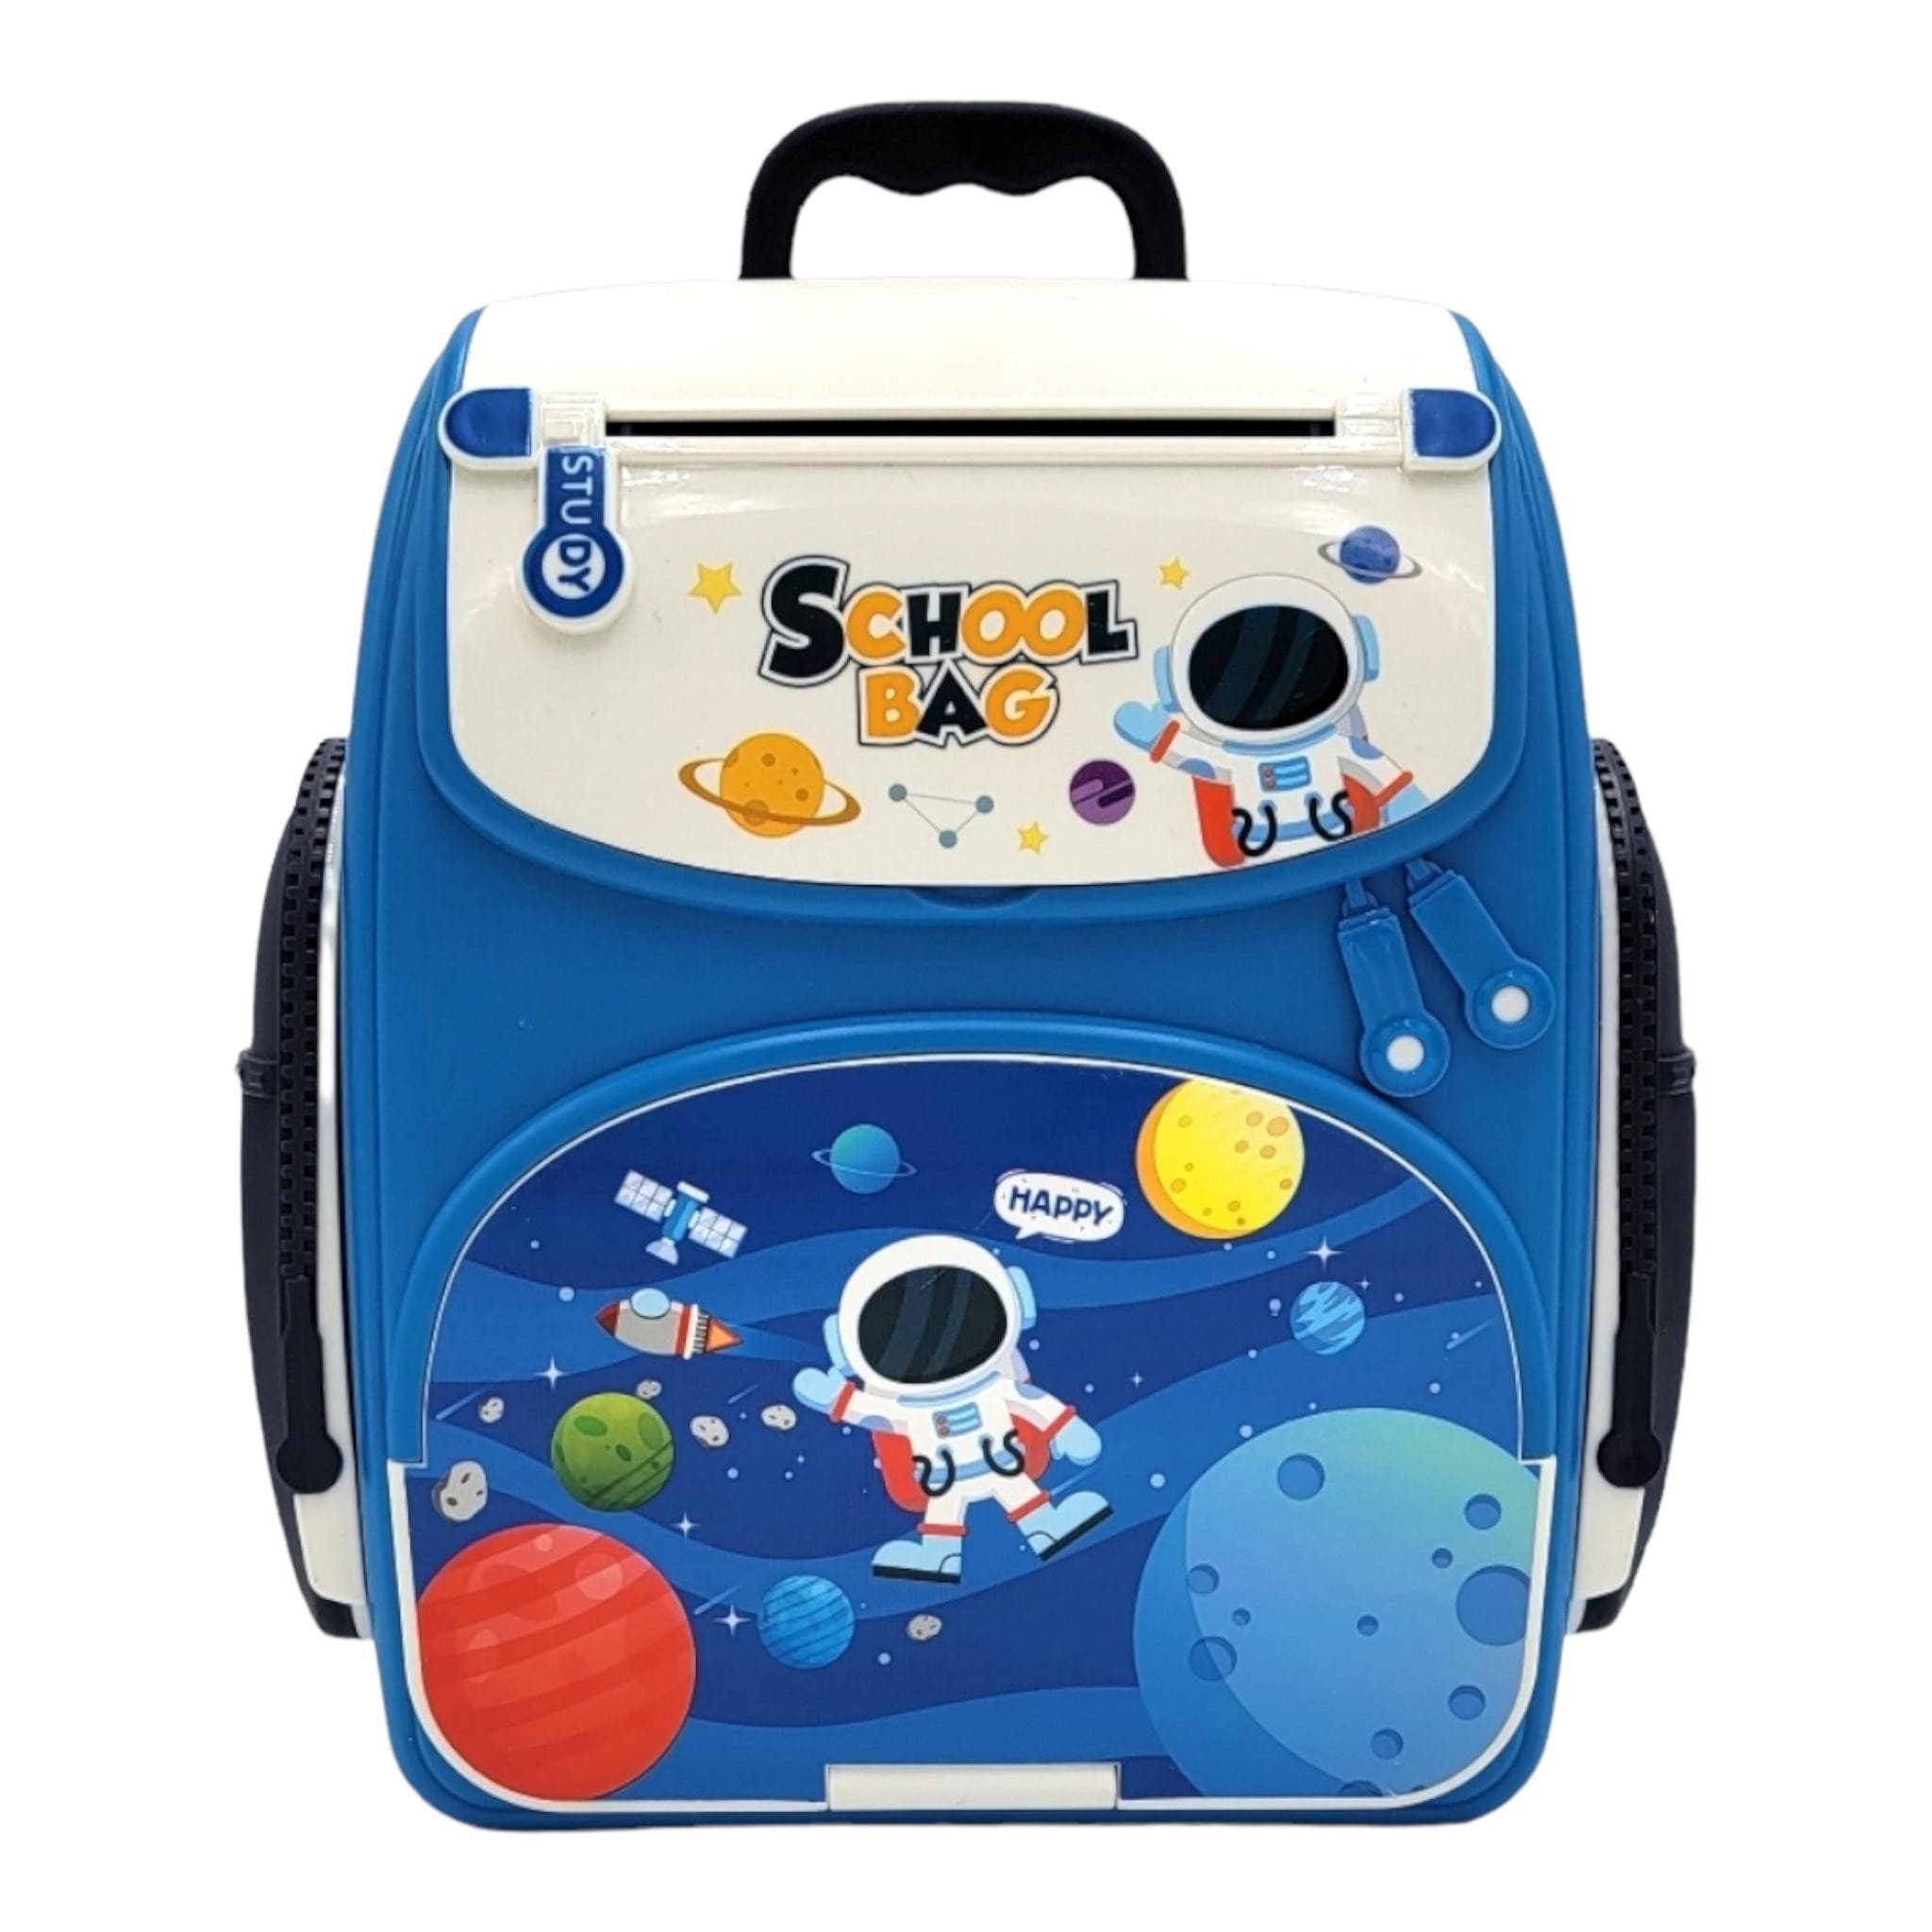 Astronaut School Bag Shape Money Saving ATM Machine Piggy Bank Toy For Kids And Toddlers